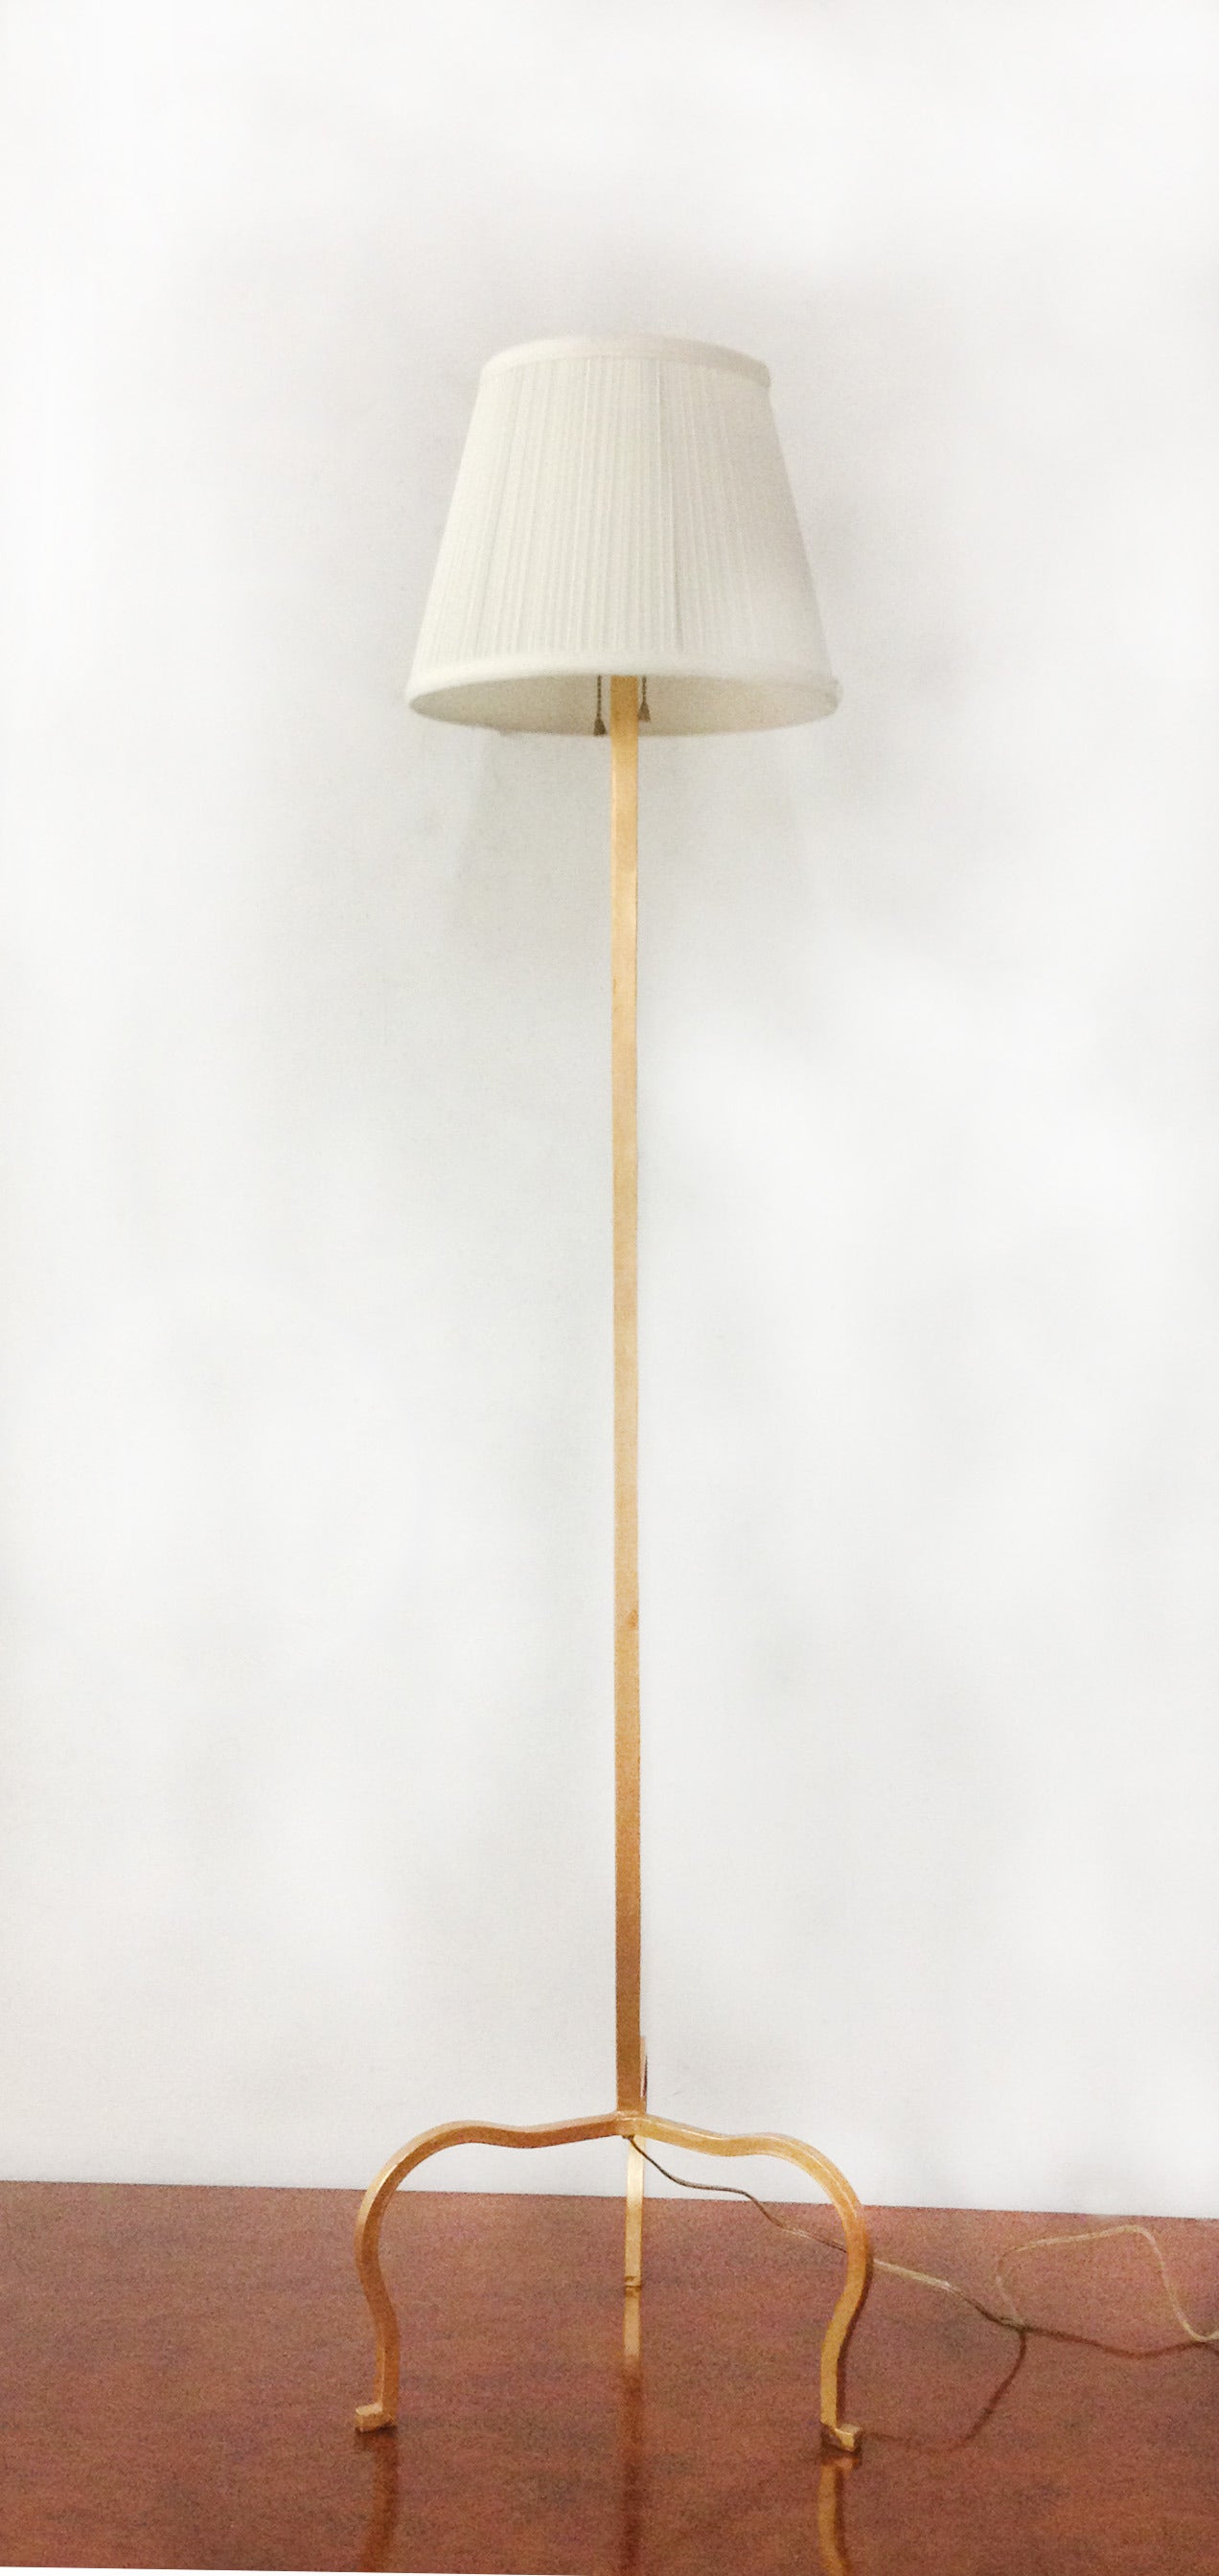 A vintage Parish-Hadley gilt iron floor lamp designed and retailed by Mrs. Henry 